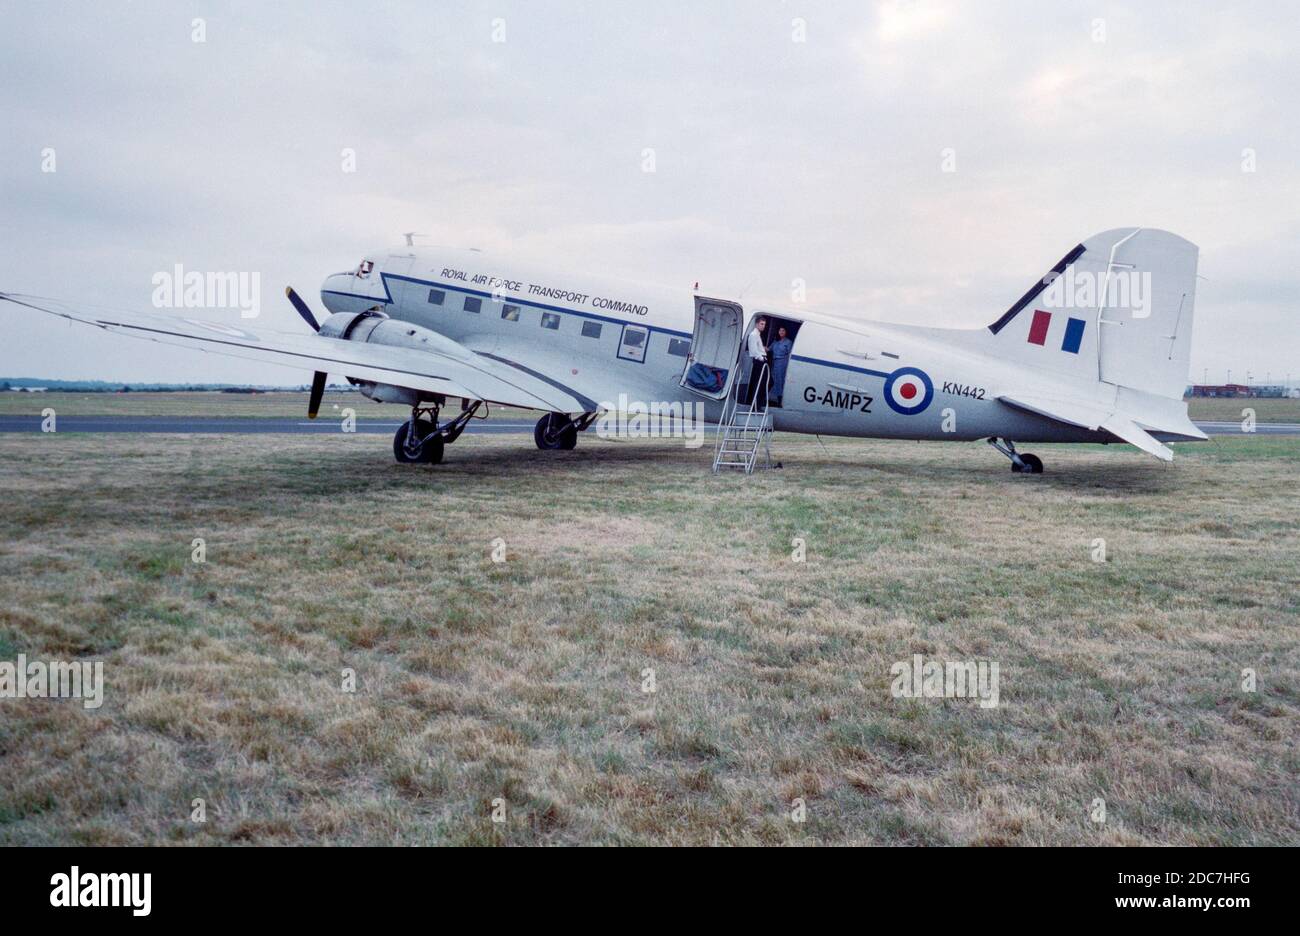 A 1999 photograph of a Douglas DC-3 Dakota, or C-47, aircraft, taken in England, registration G-AMPZ, painted in the colours of the British Royal Air Force Transport Command, with the military serial number KN442. The aircraft is parked on grass with two people visible in the doorway. Stock Photo